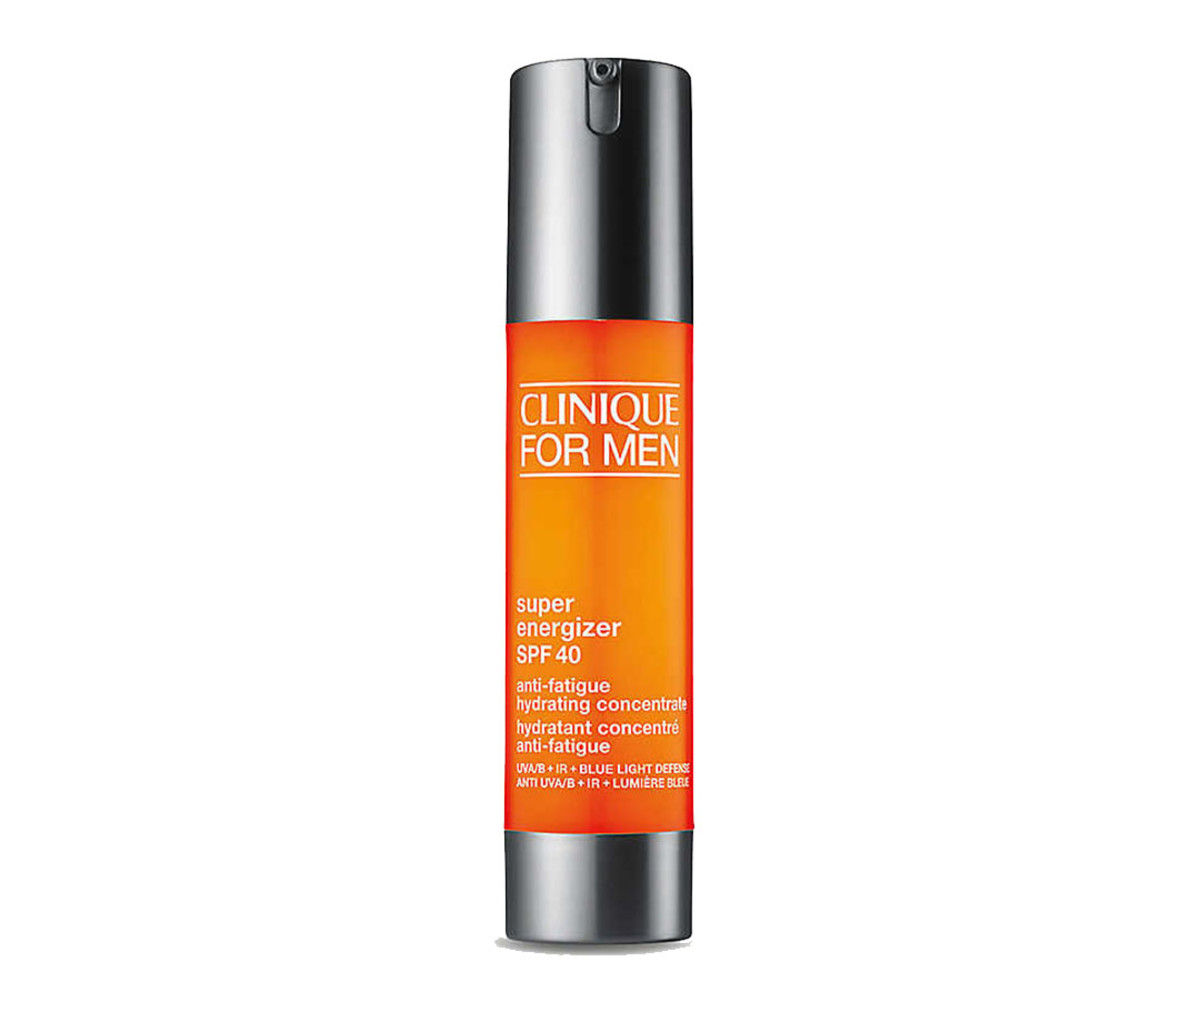 Energizing Moisturizer SPF 25 from Clinique for Men